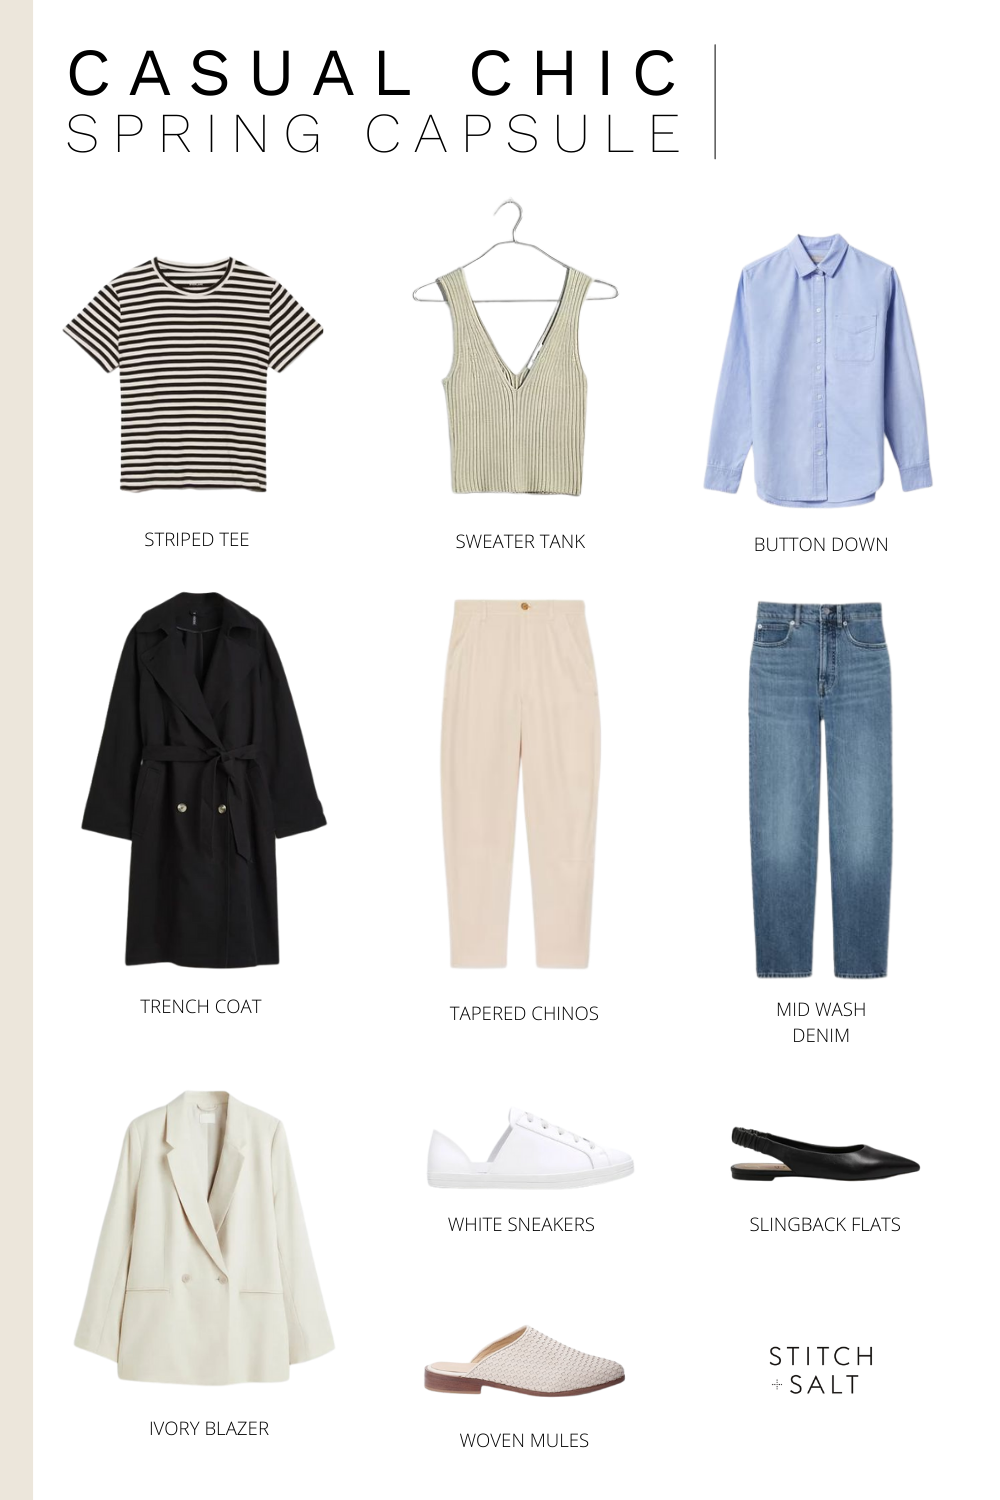 Casual Chic Spring Capsule Wardrobe + 17 Outfit Ideas - Stitch & Salt